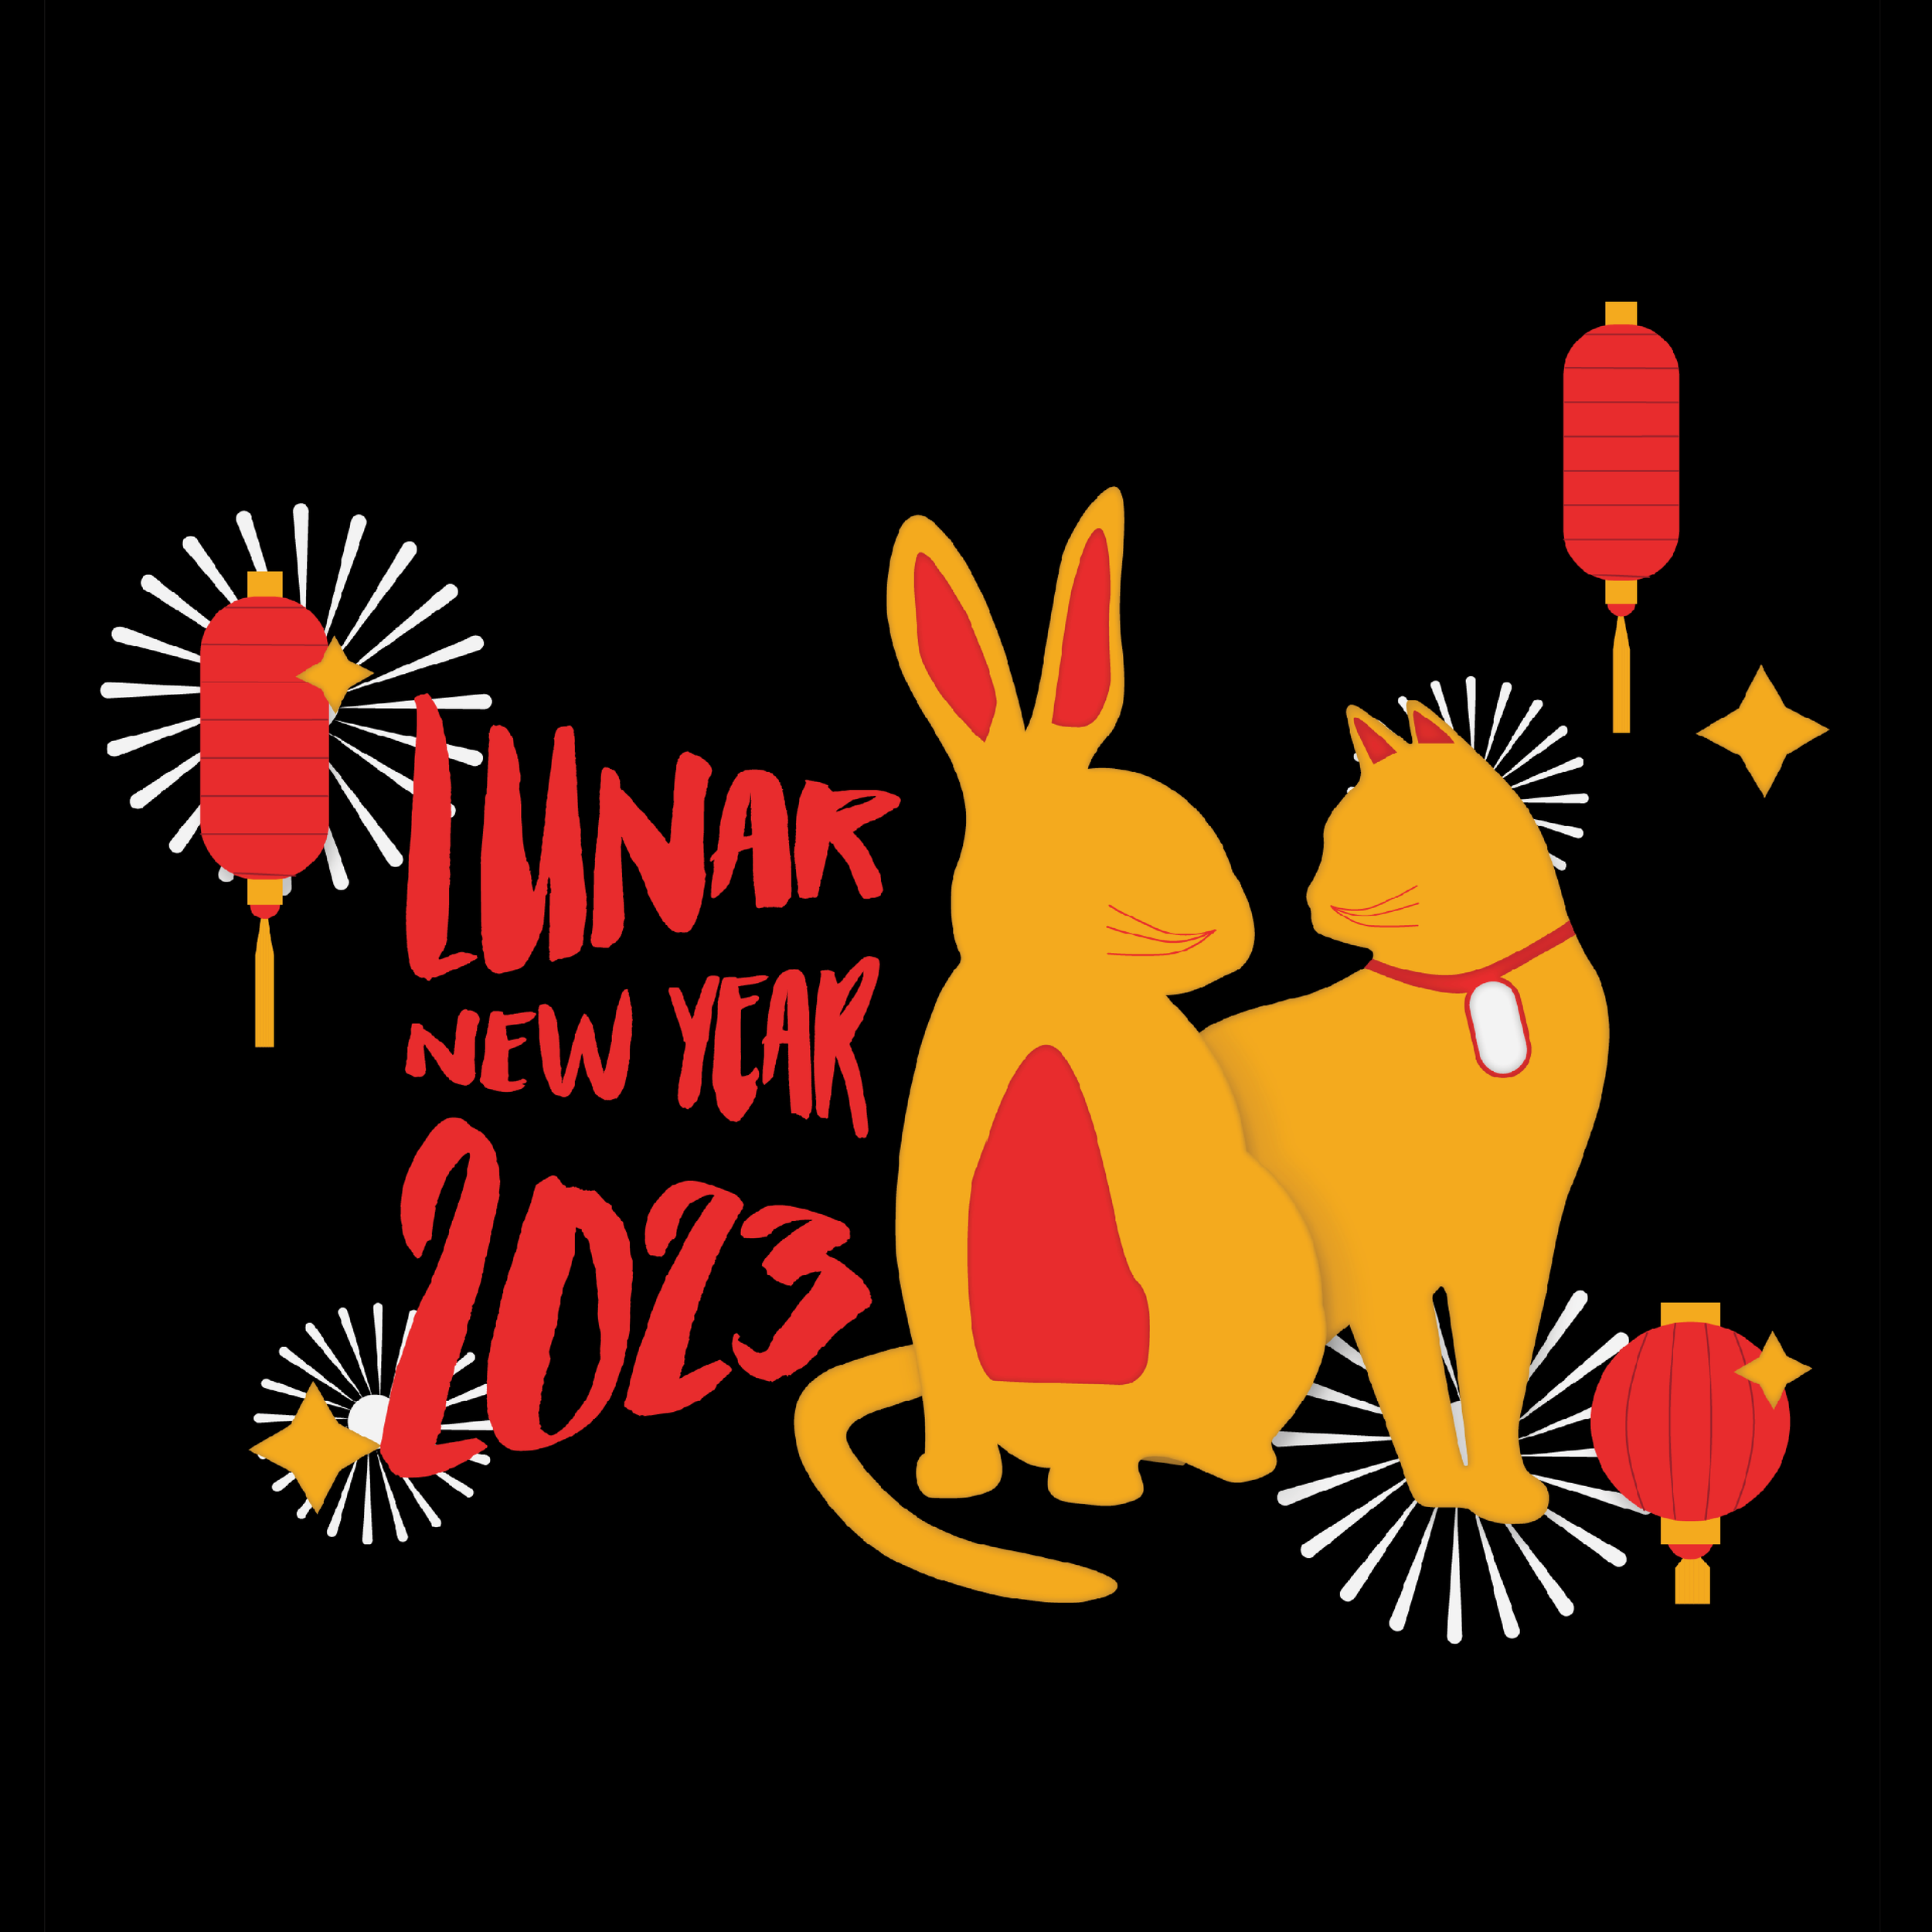 Lunar New Year 2023: The Year of the Rabbit - BKReader